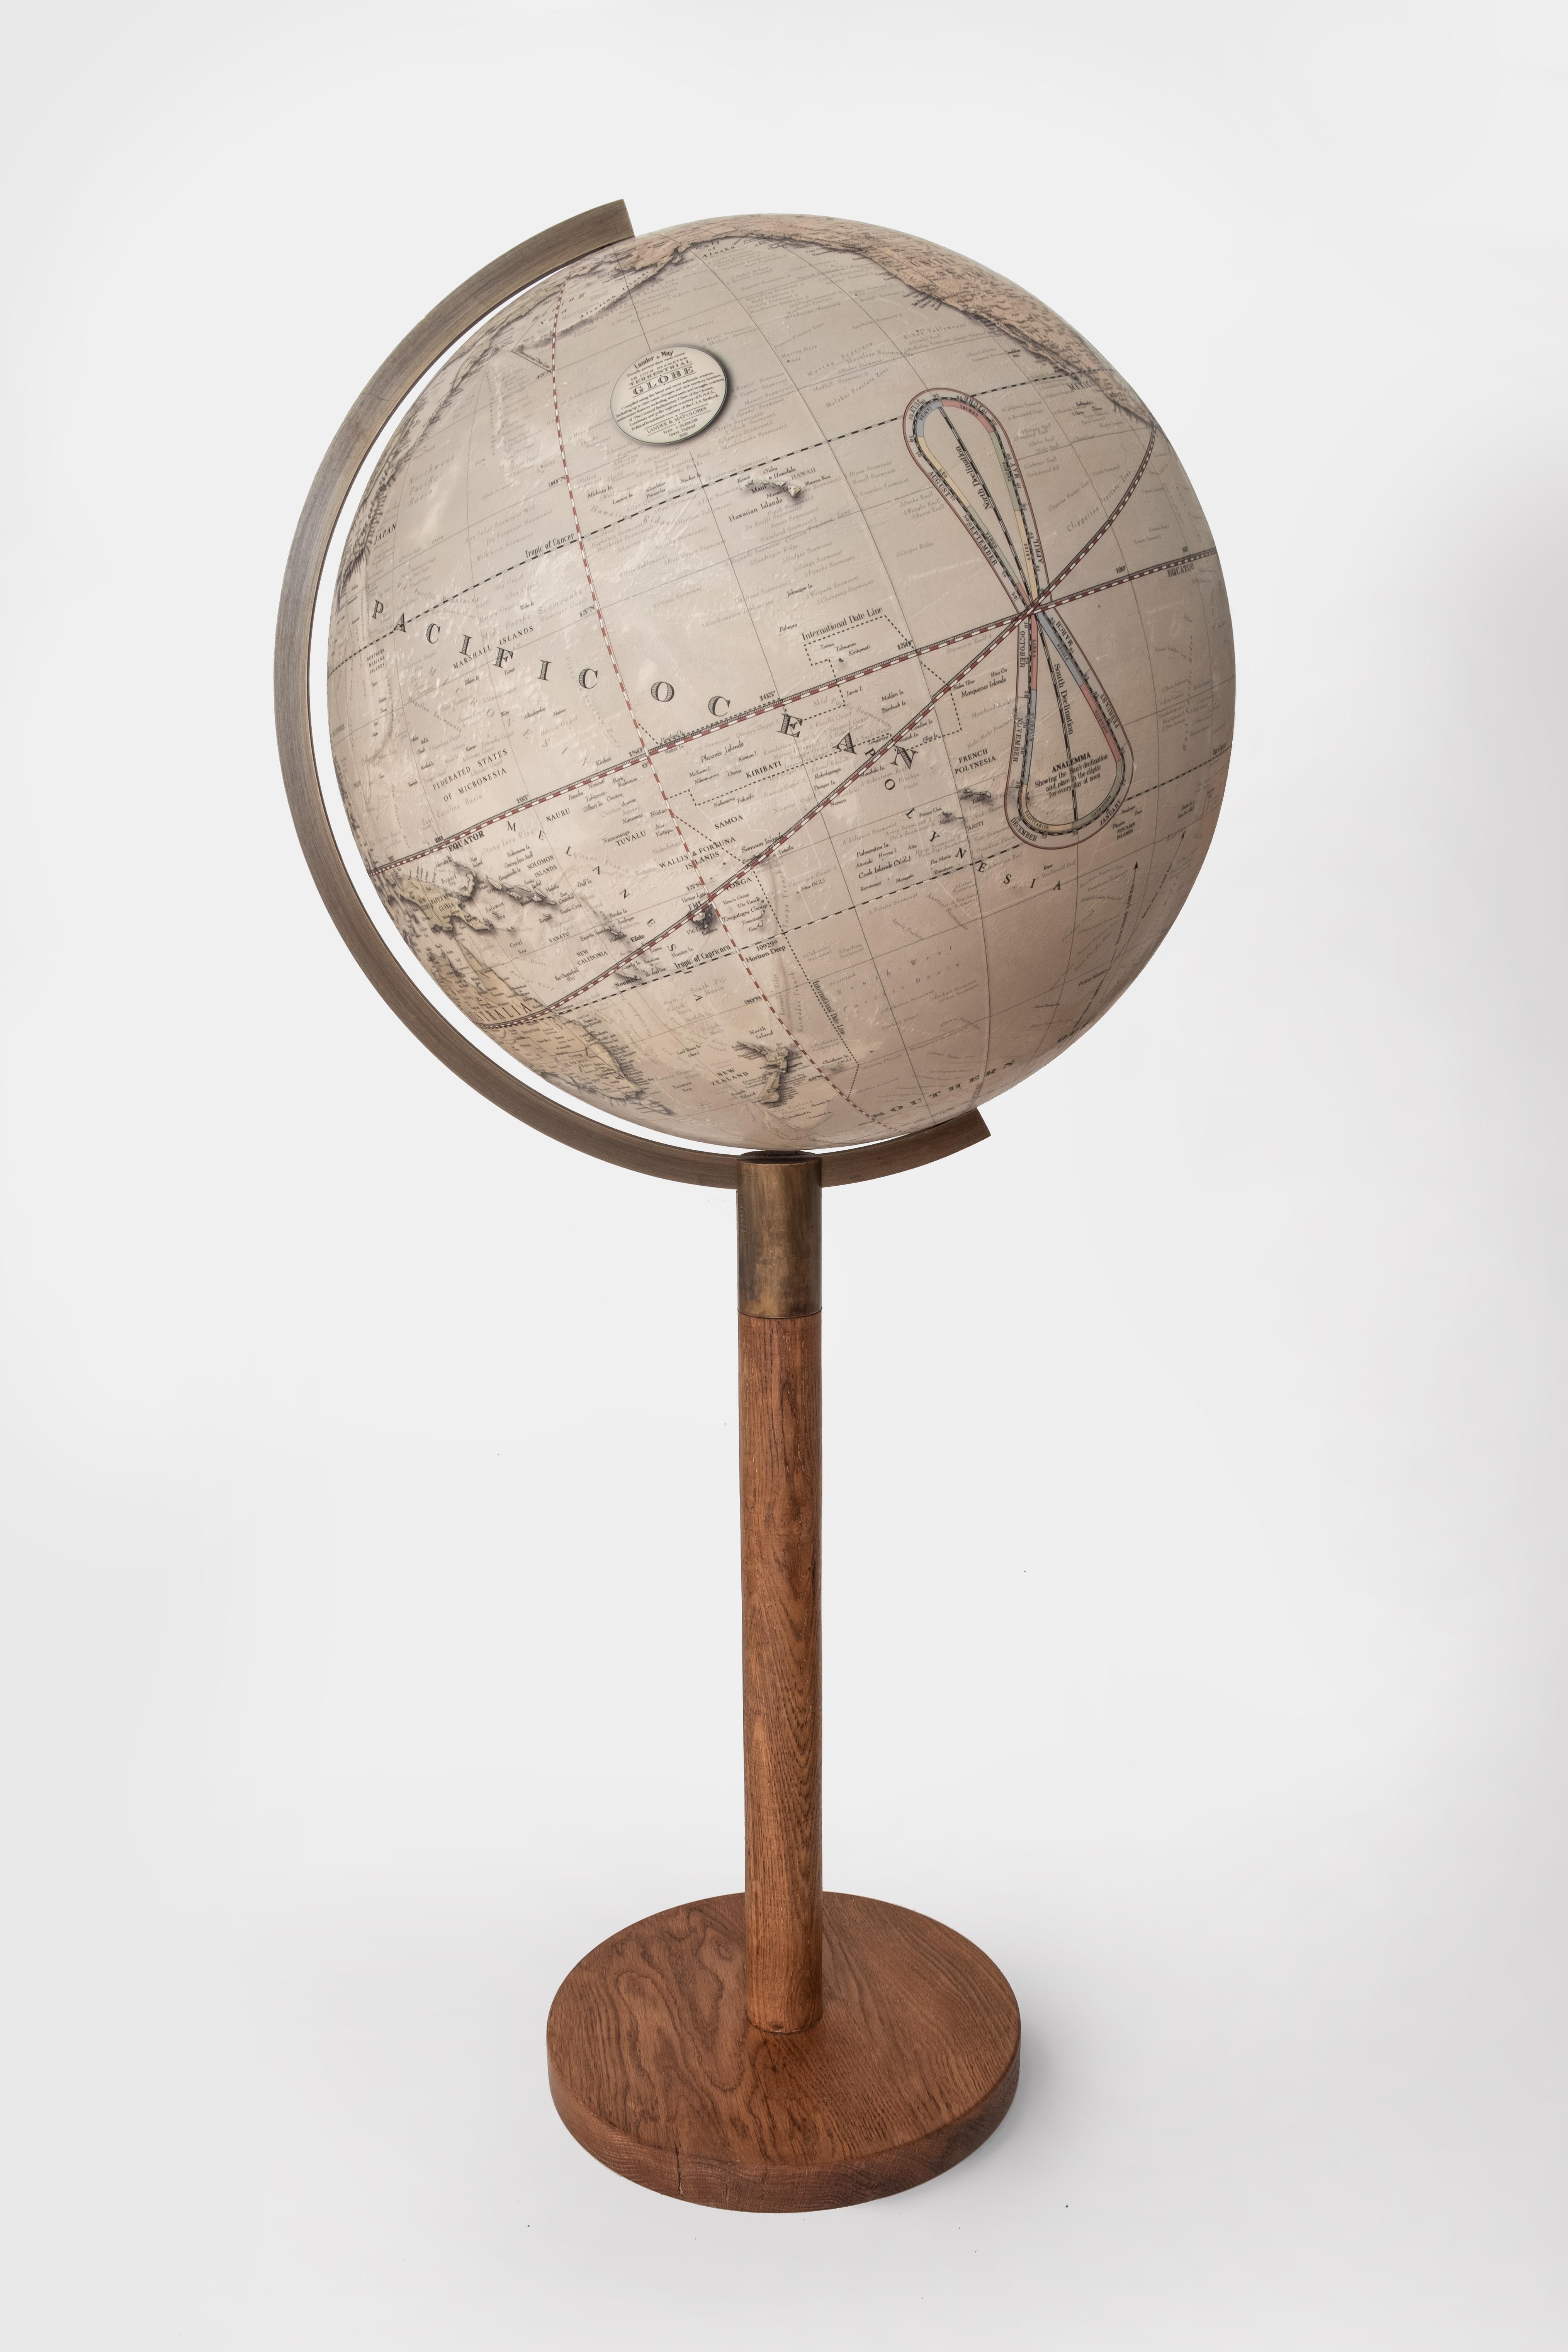 This beautiful floor standing globe makes a stunning addition to study, living room, drawing room or atrium.
The detailed map cartography depicts the world as it is today, with up to date place names and borders; printed with a tastefully vintage